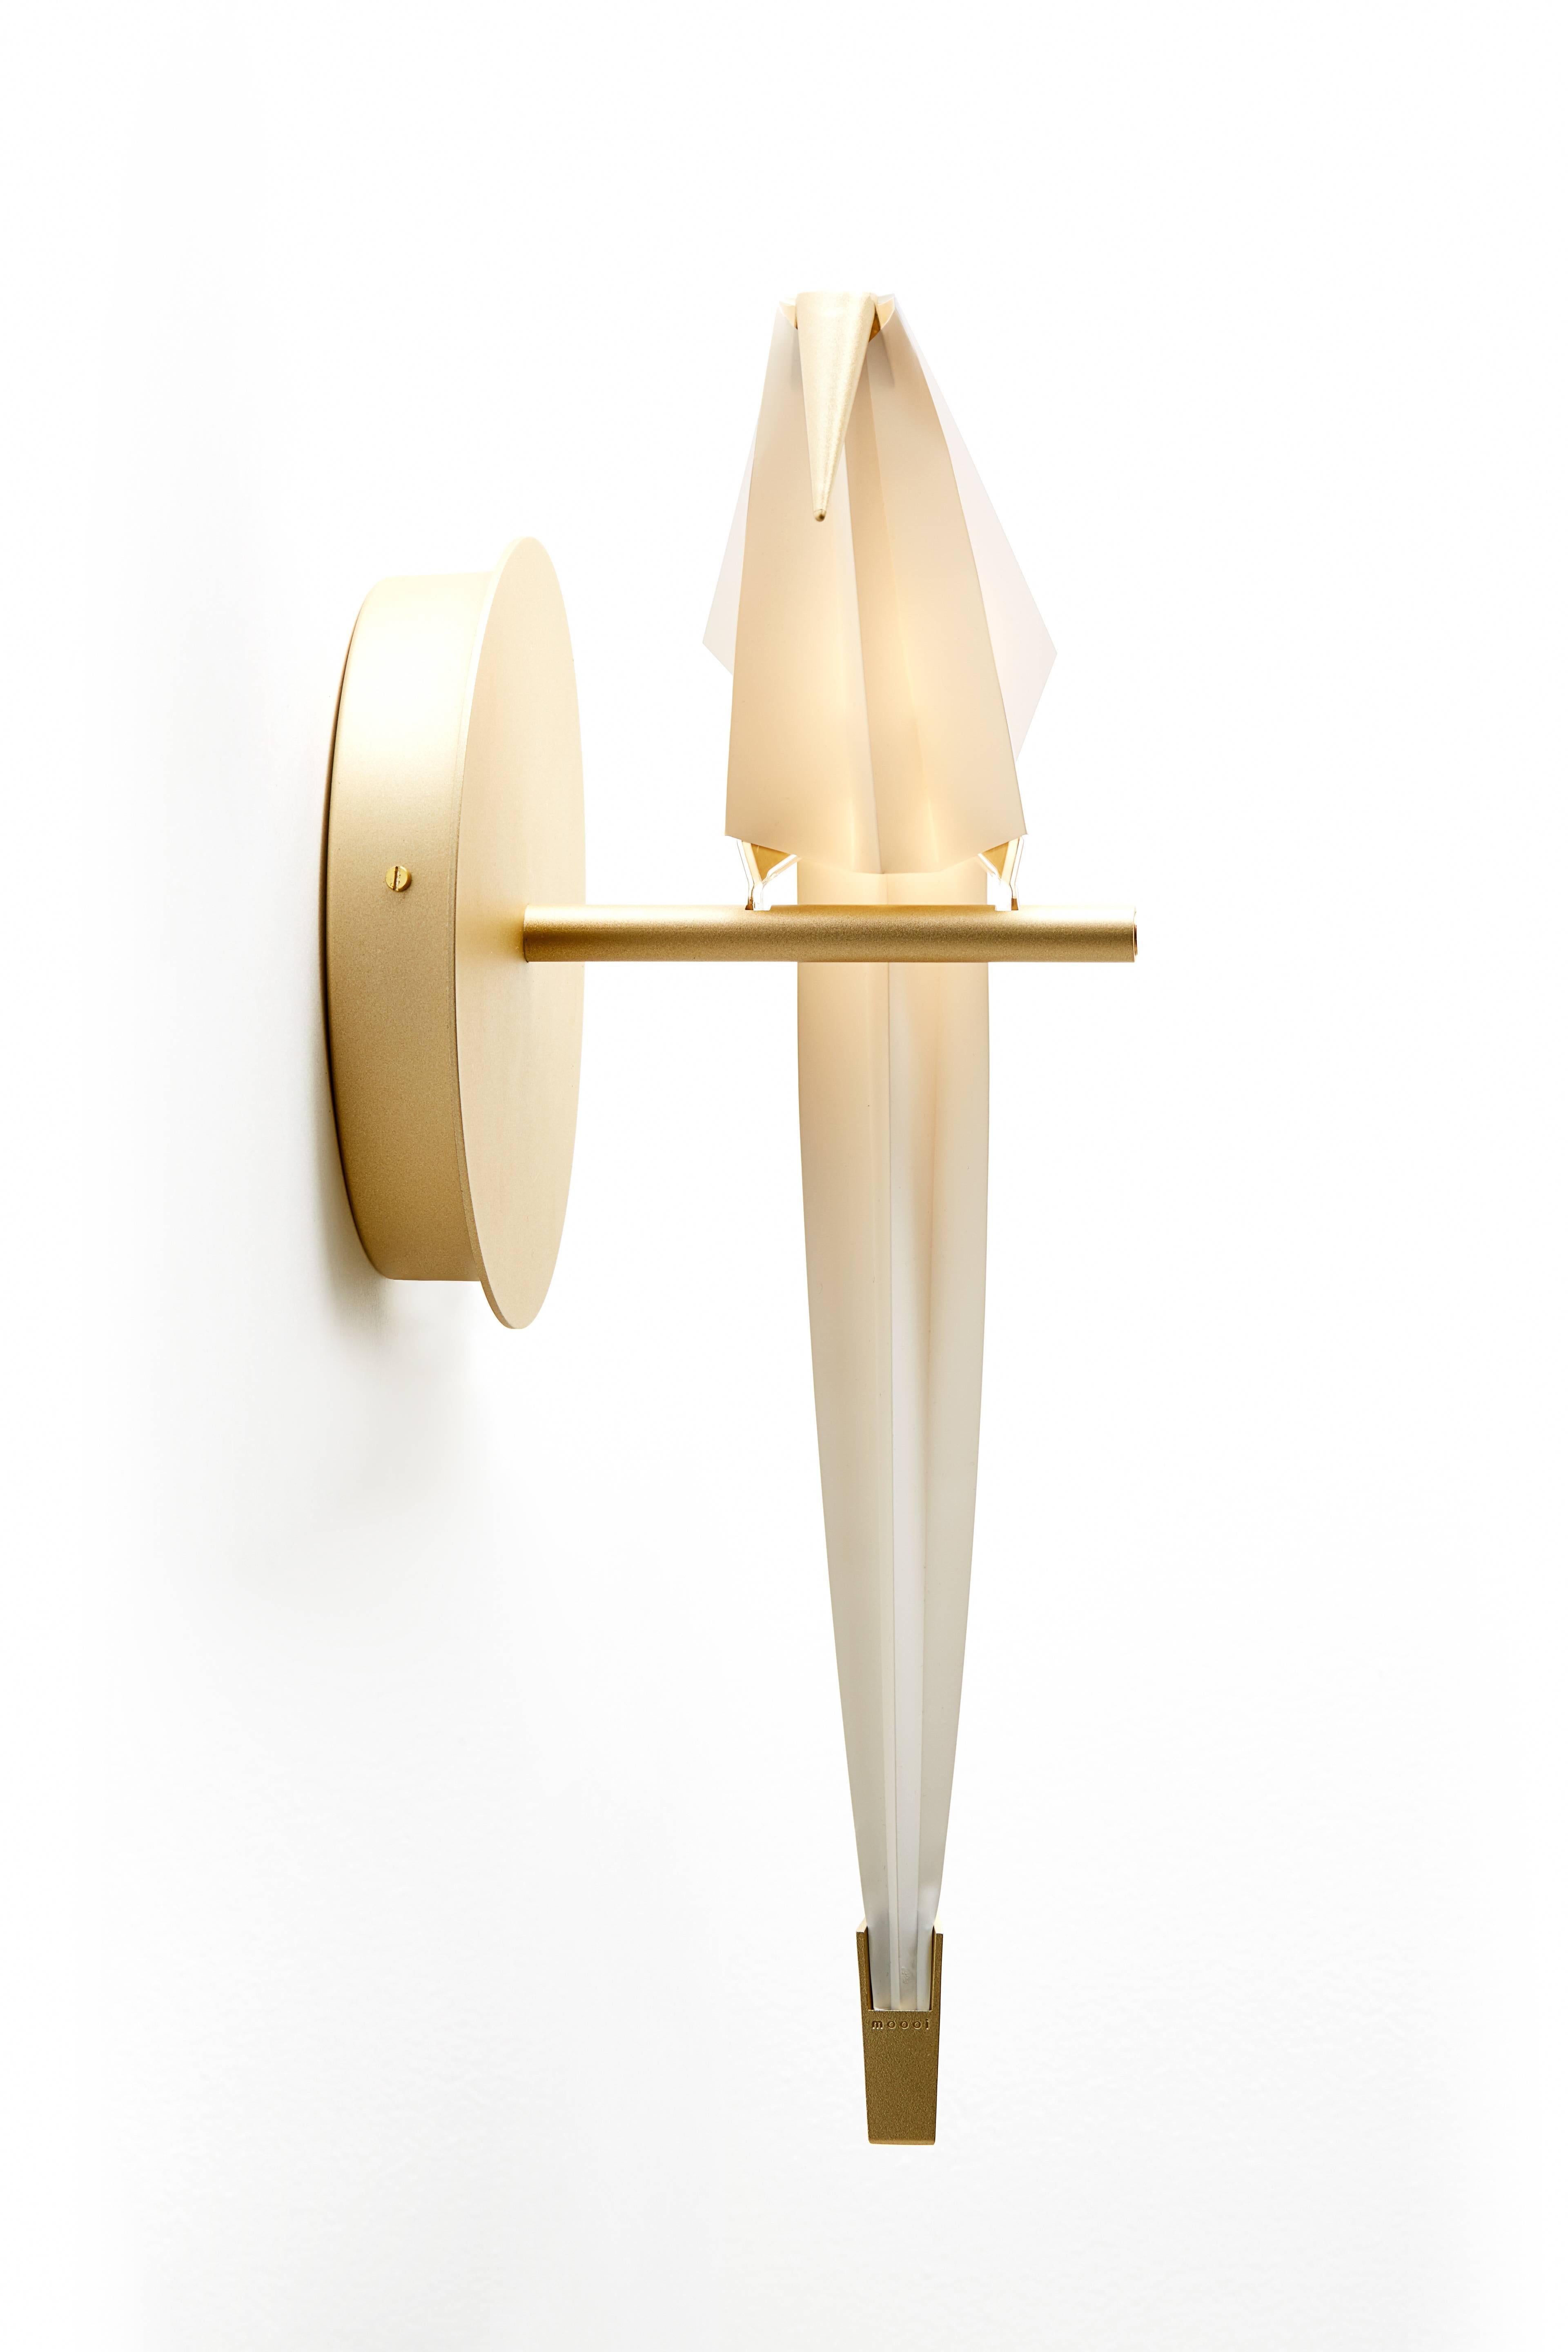 Aluminum Moooi Perch LED Wall Sconce Light in Brass with Large White Bird For Sale